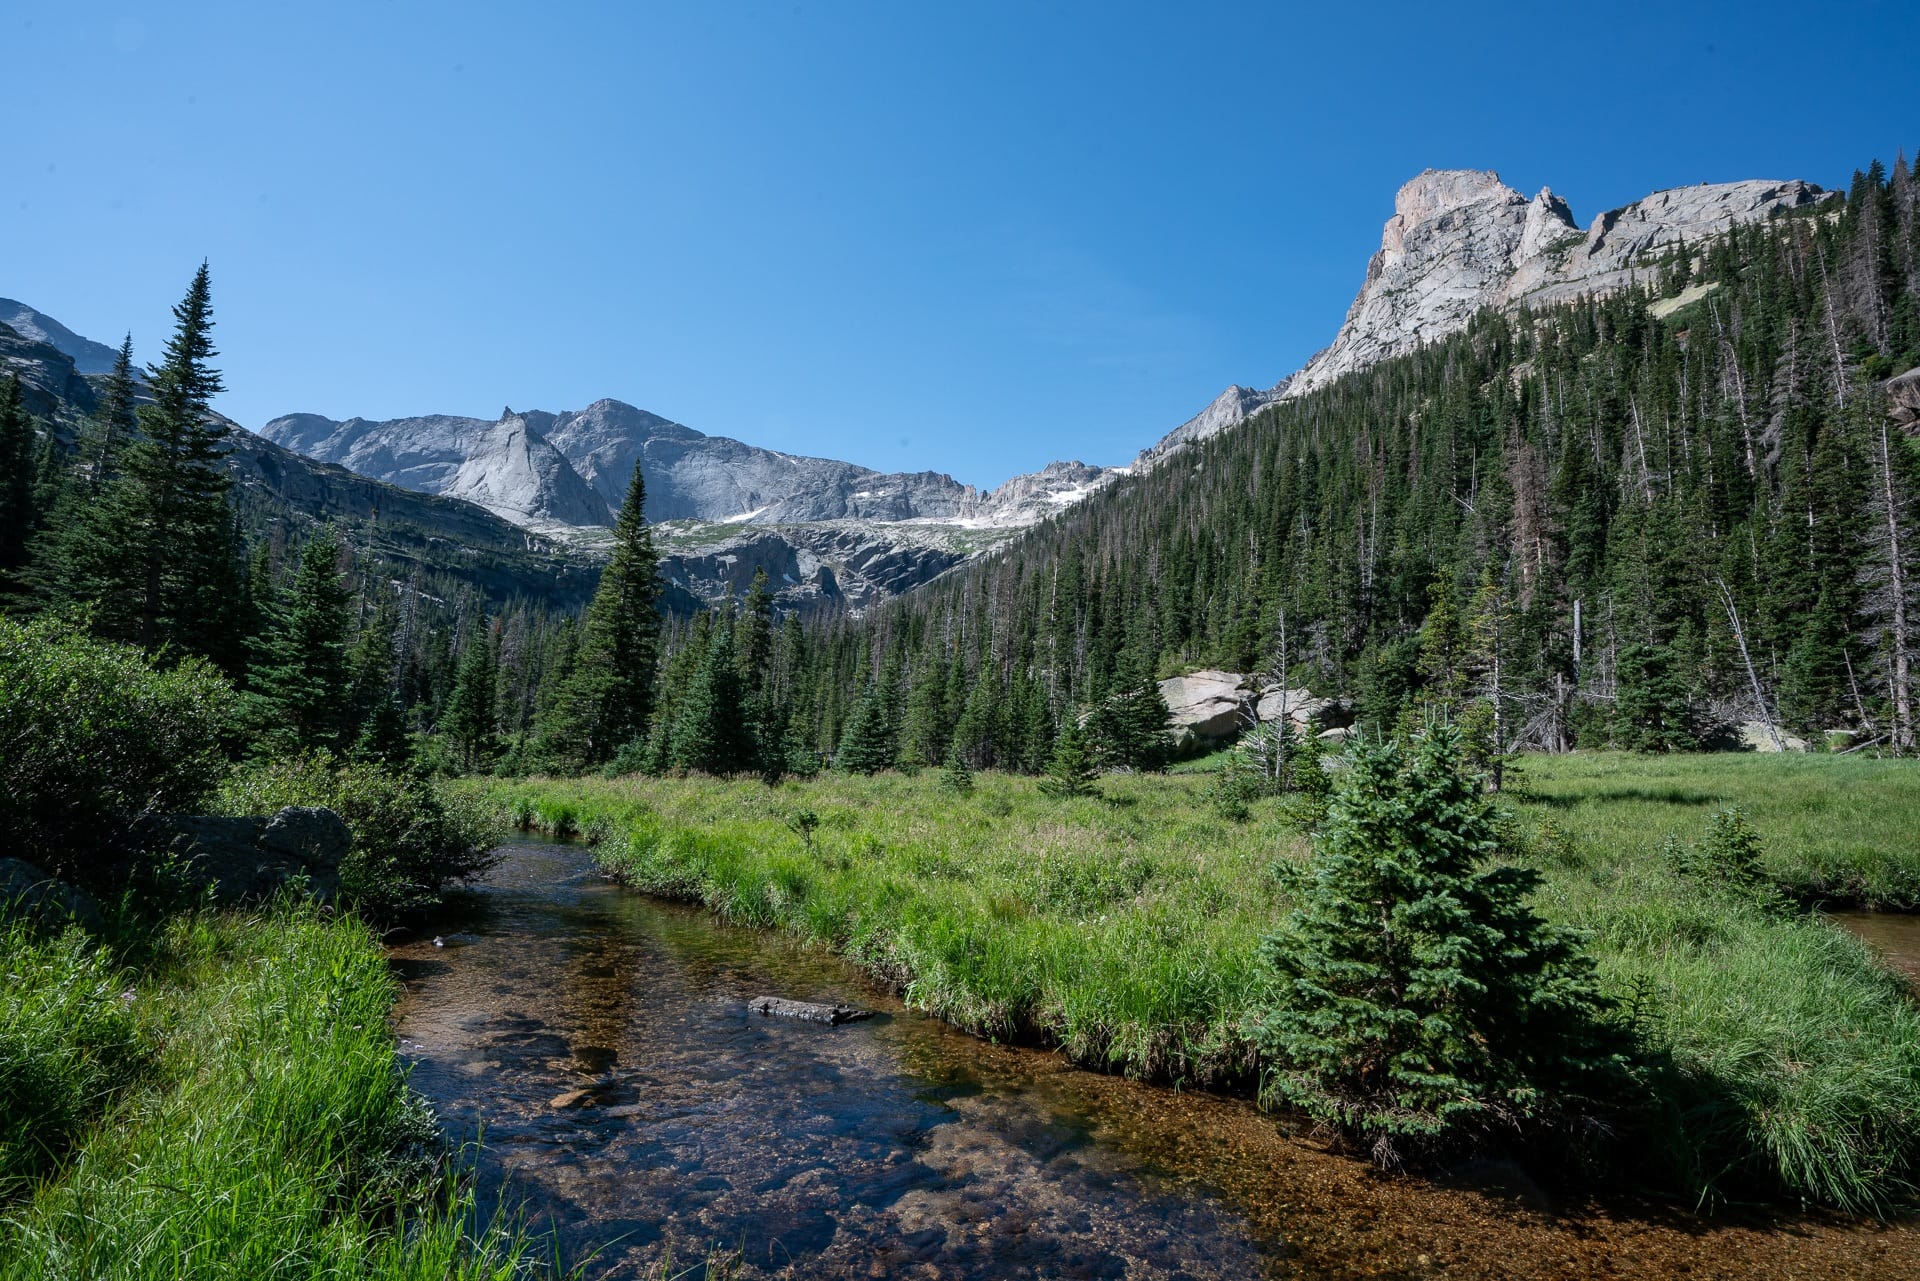 Black Lake Trail // Get our guide to the best day hikes in Rocky Mountain National Park including distances, trail descriptions, what to be prepared for, and more.